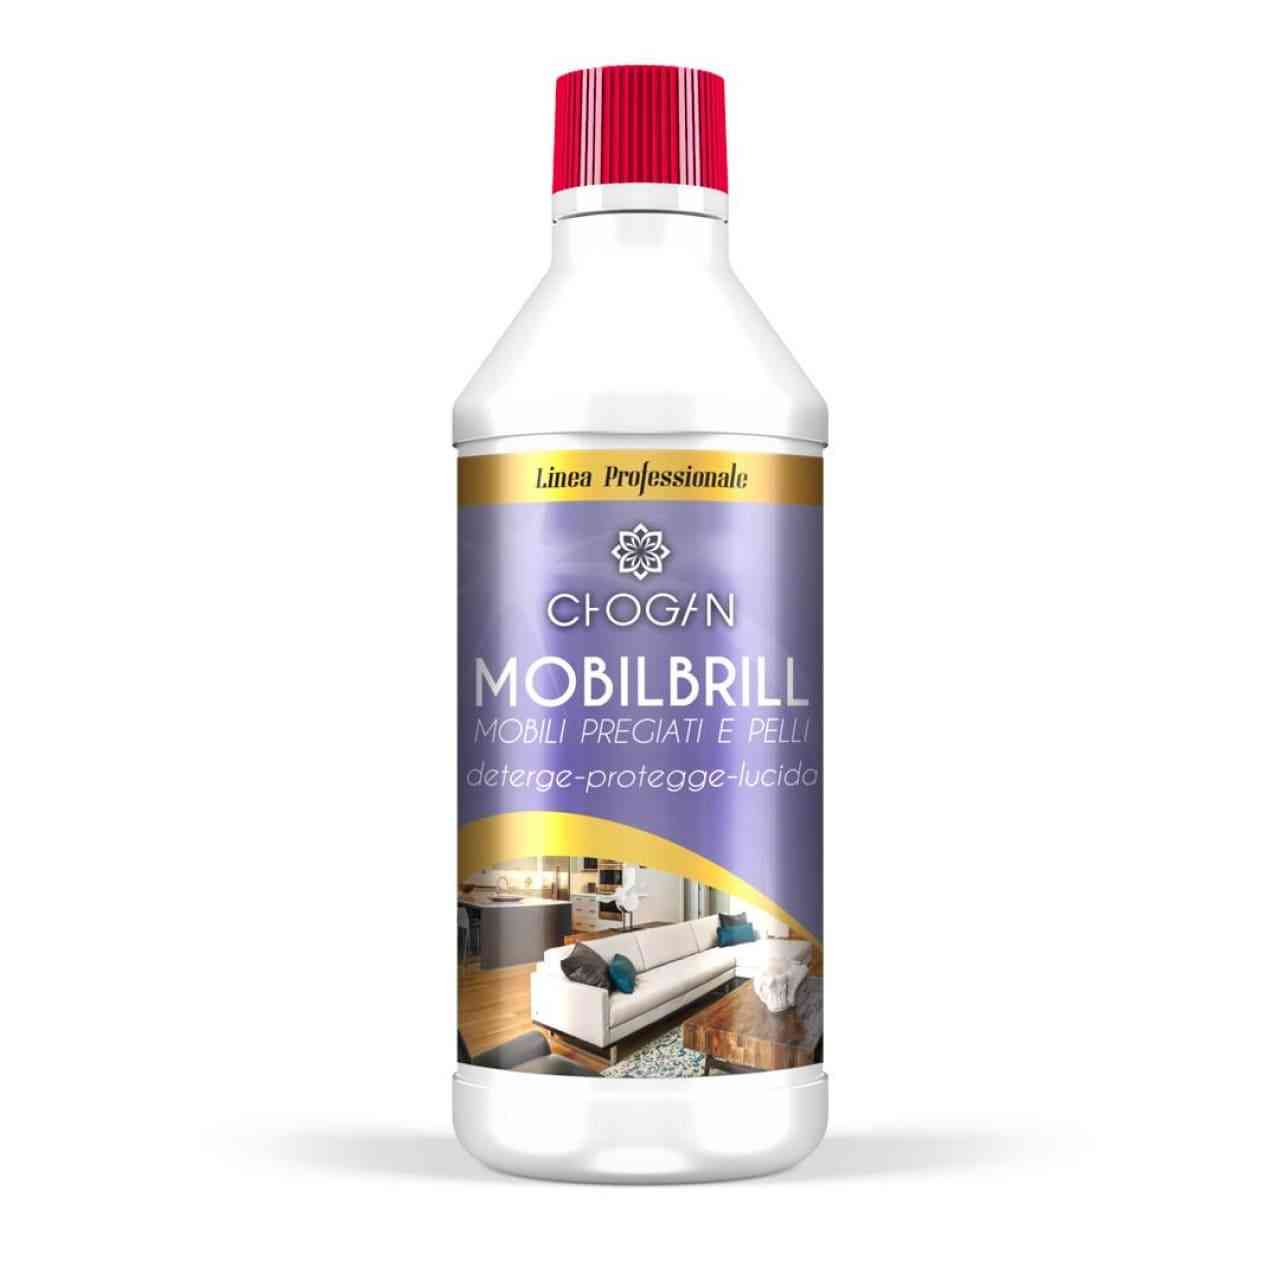 MOBILBRILL gentle multi-surface cleaner with polishing effect